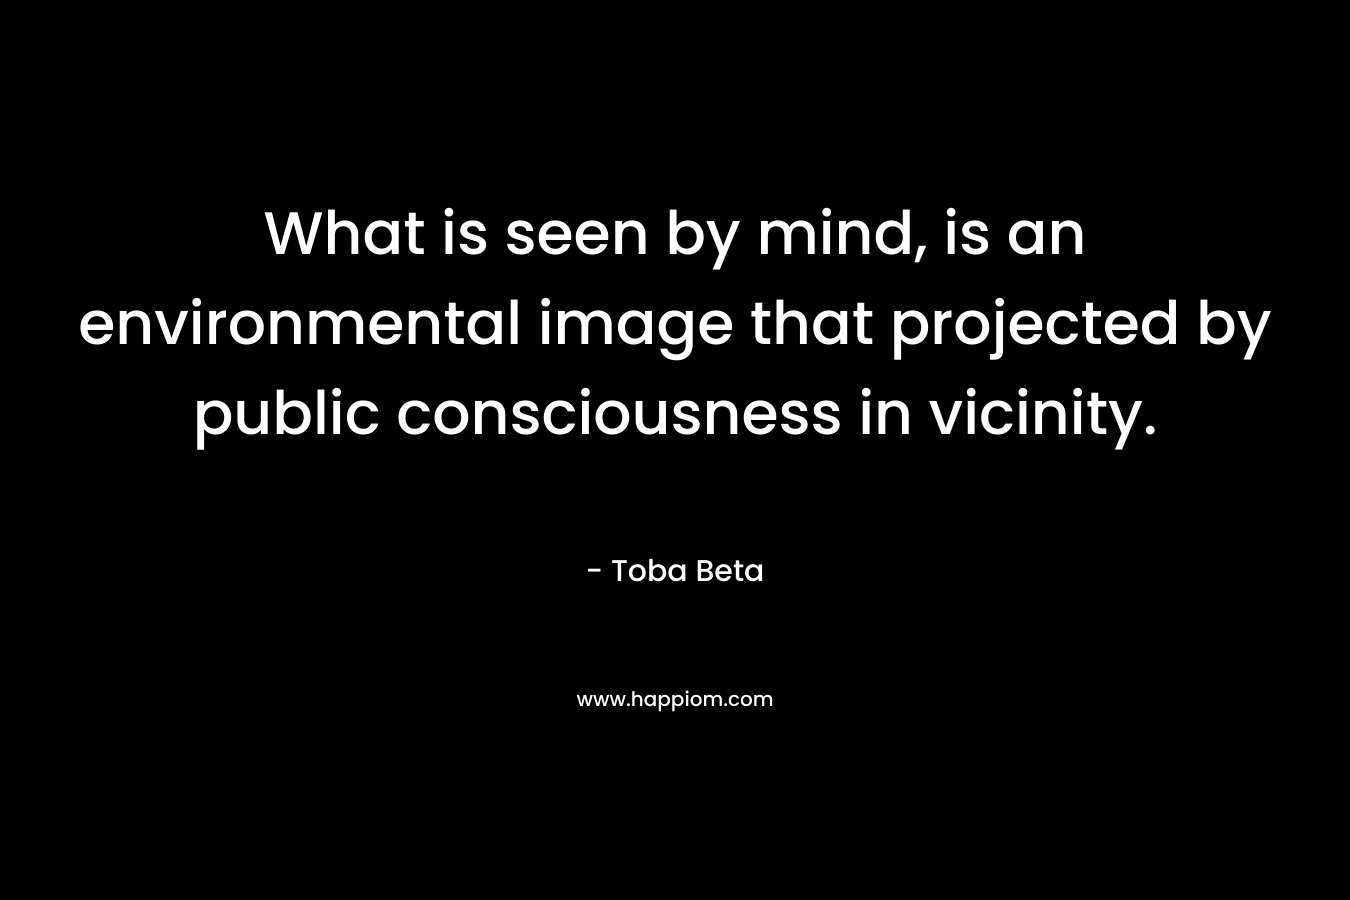 What is seen by mind, is an environmental image that projected by public consciousness in vicinity. – Toba Beta